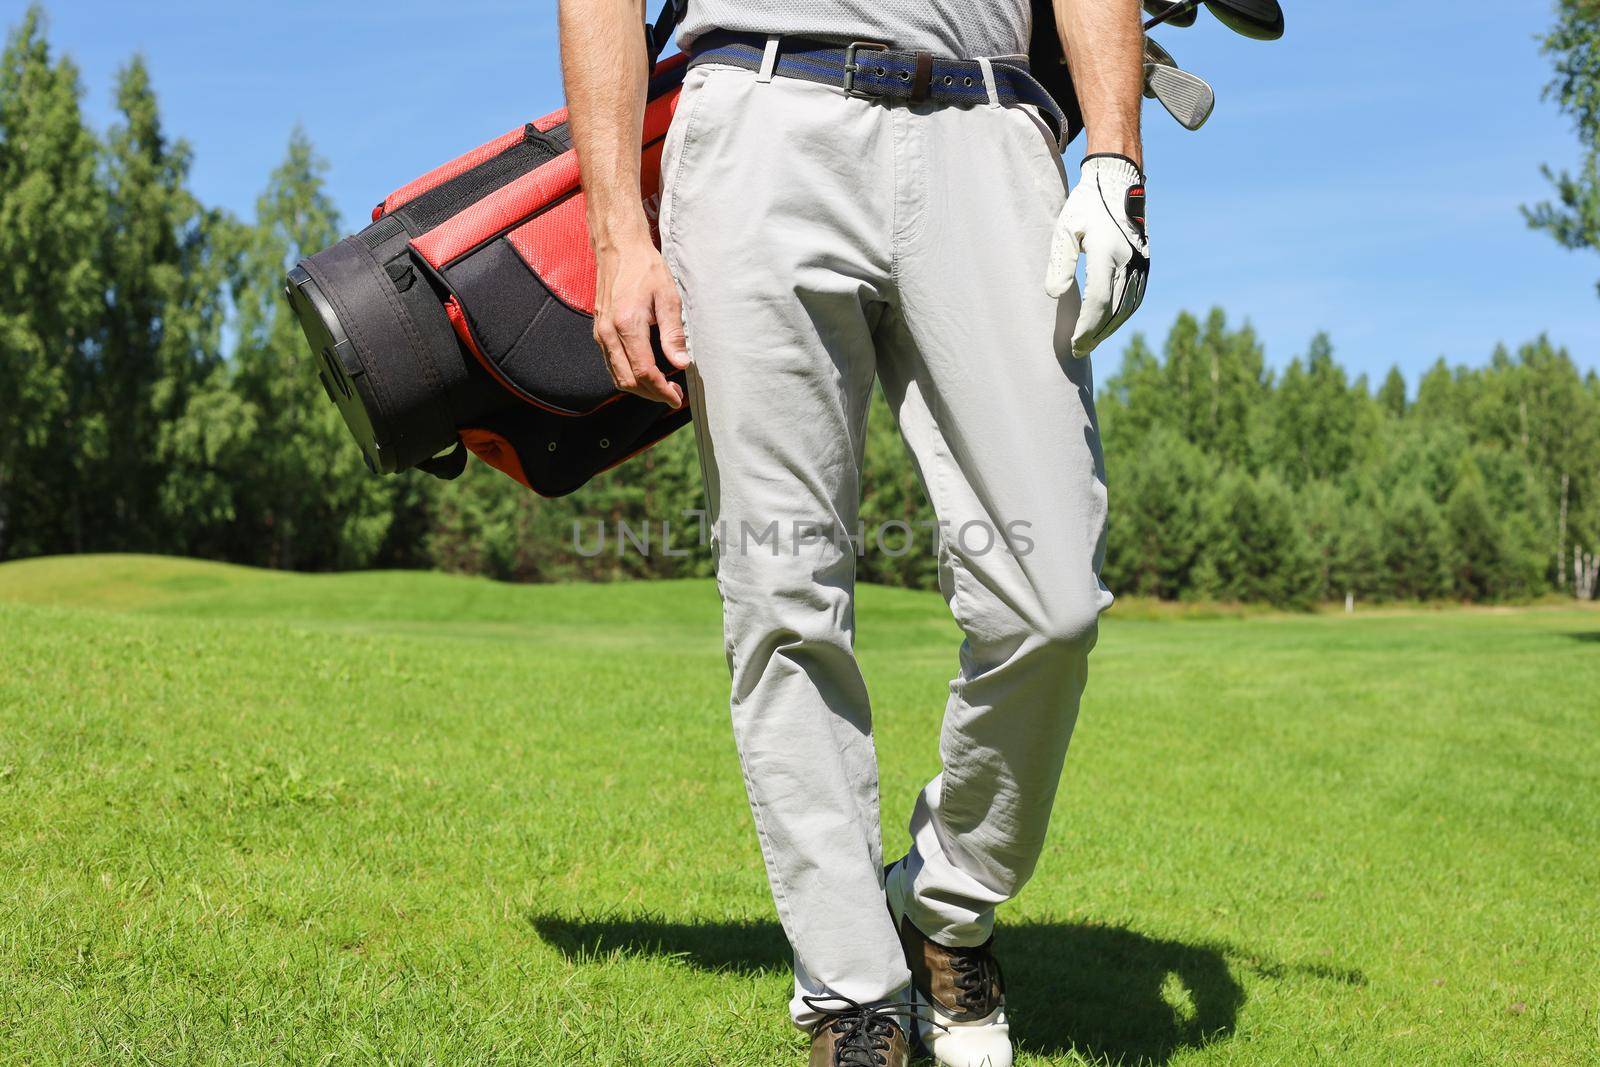 Cropped image of male golfer carrying golf bag with drivers while walking by green grass